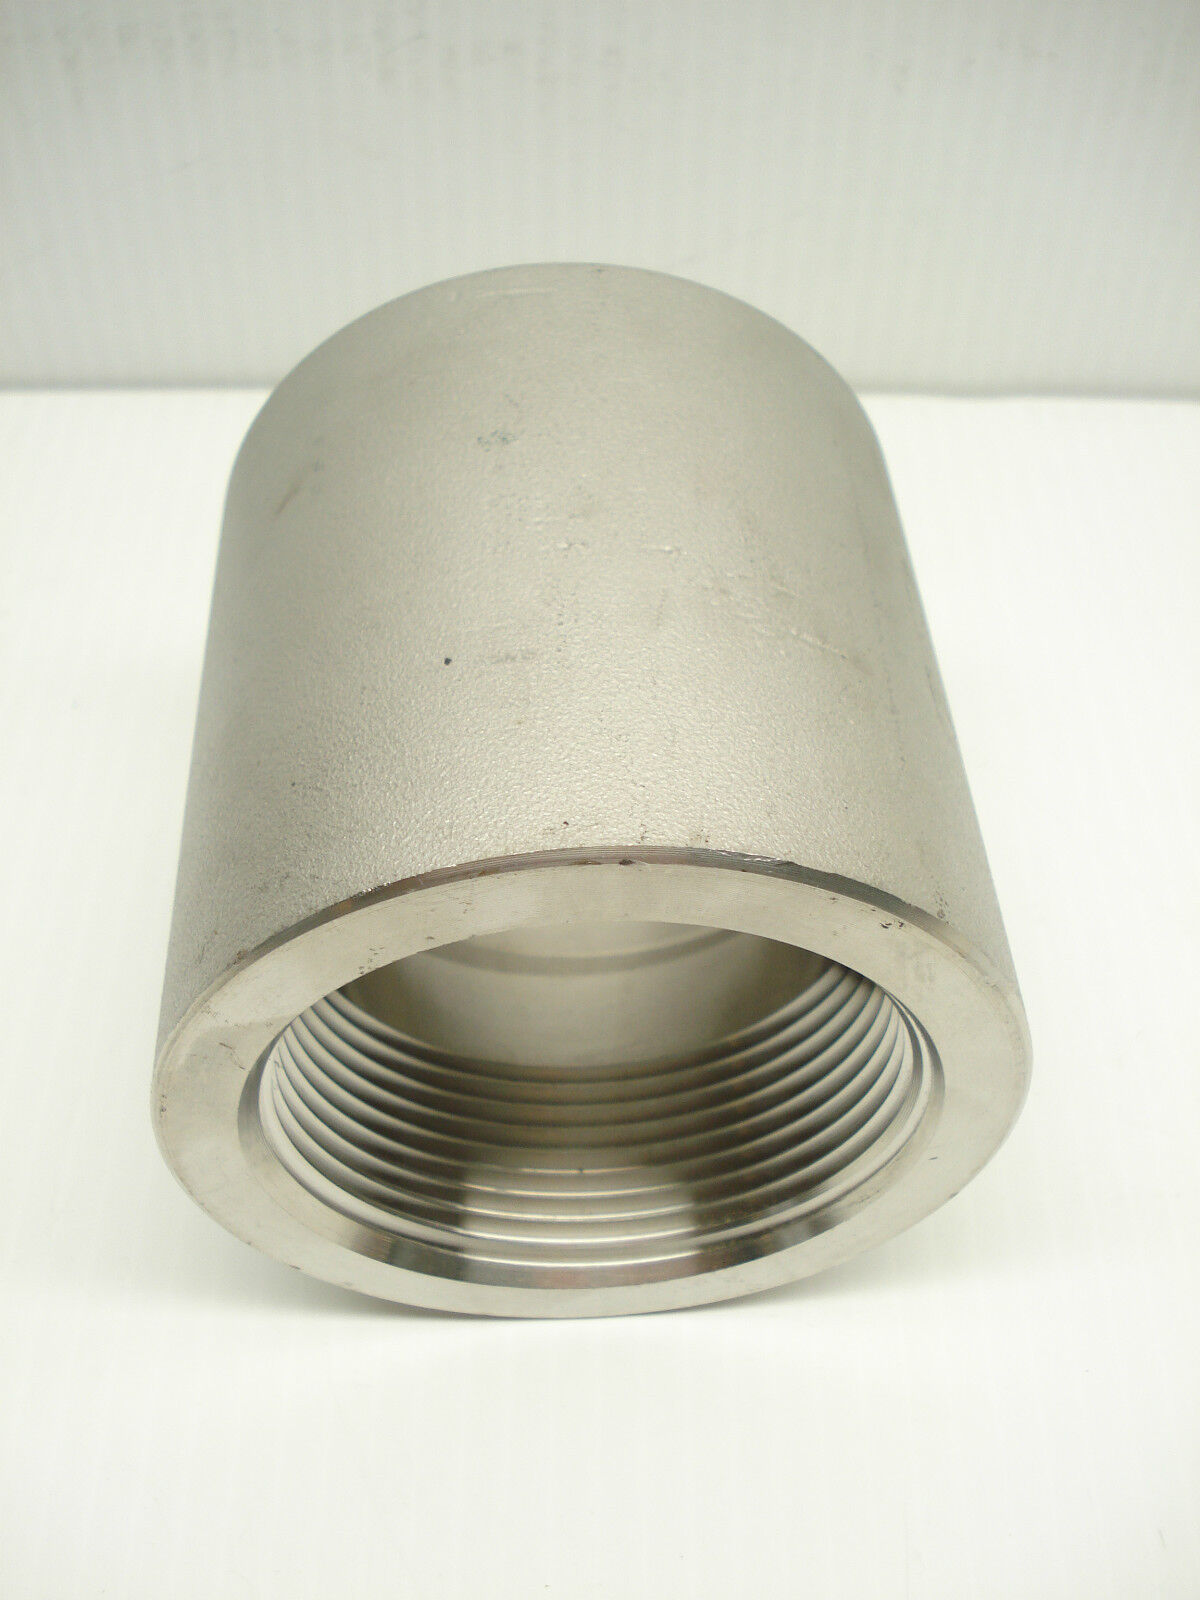 W208B16 3M A/SA182E316/F316L 2-1/2” 316 STAINLESS STEEL COUPLING